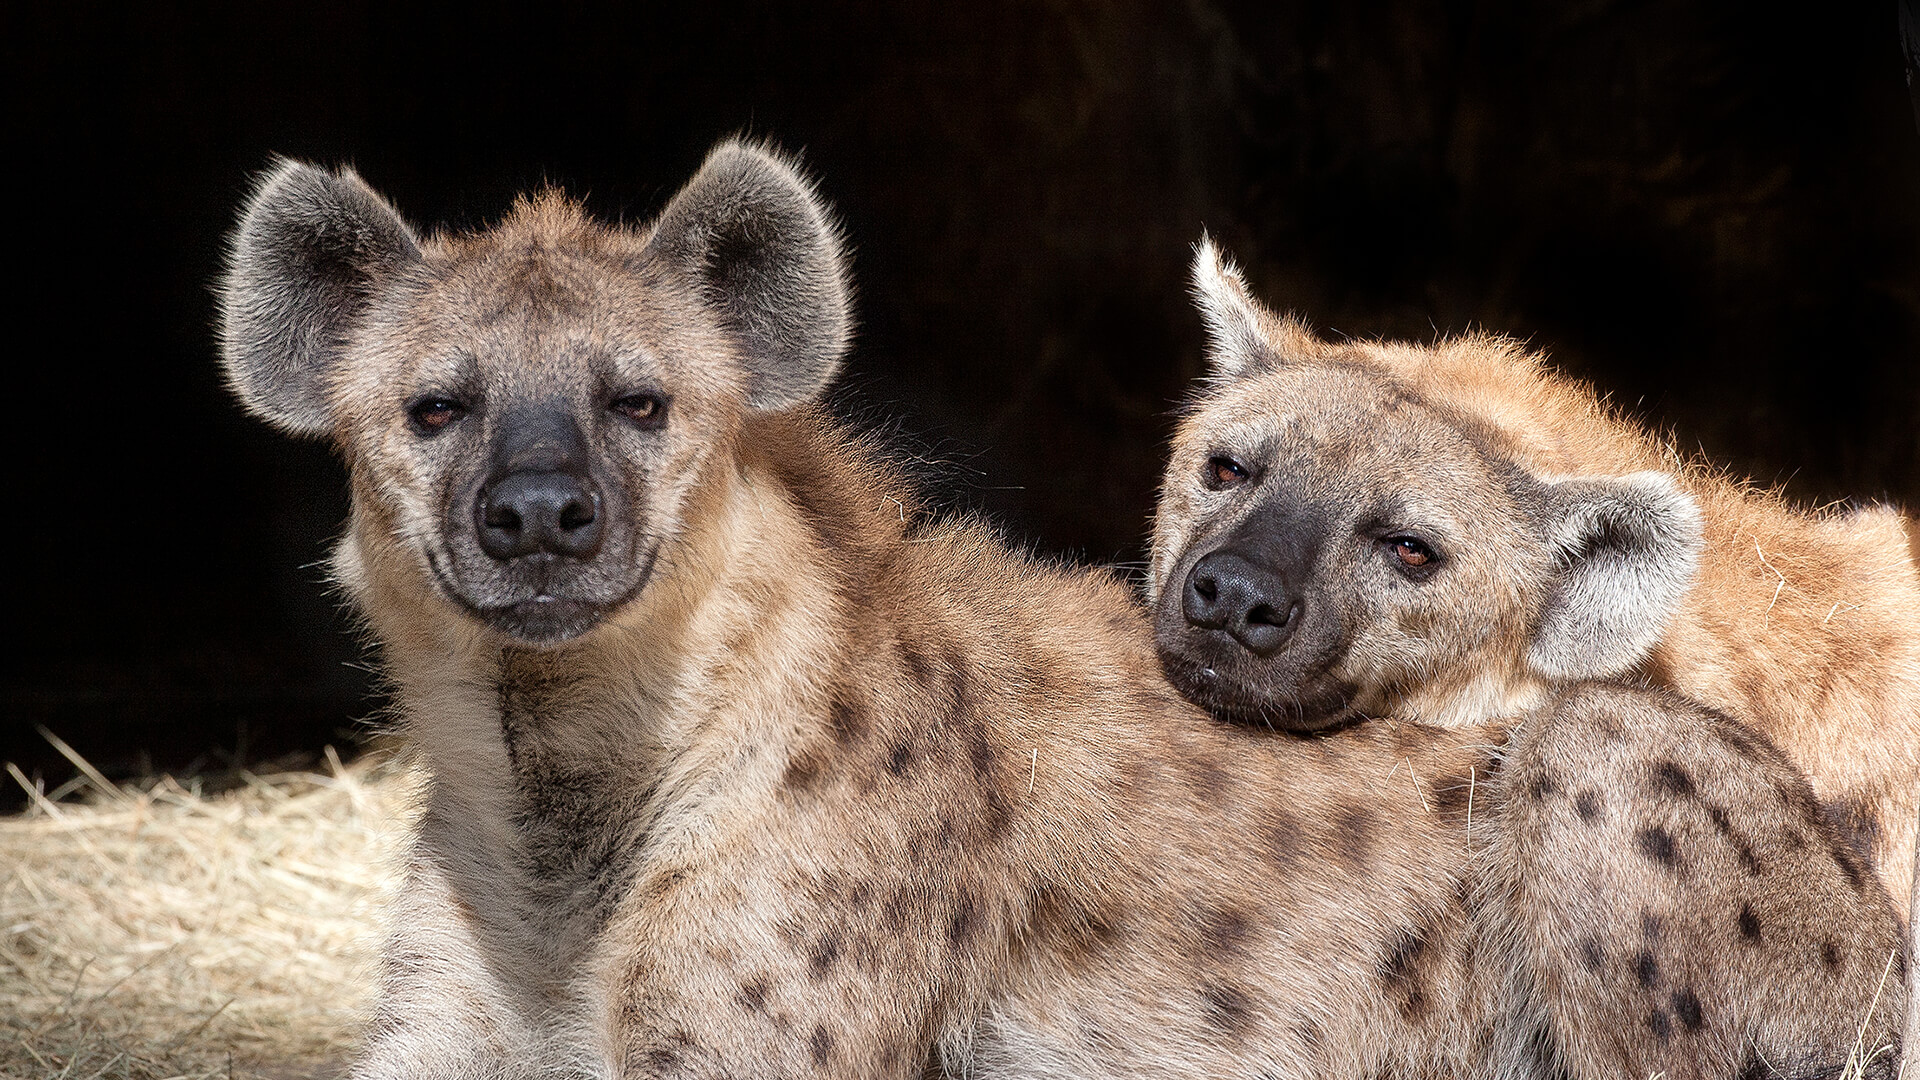 Creature Feature: Spotted Hyenas